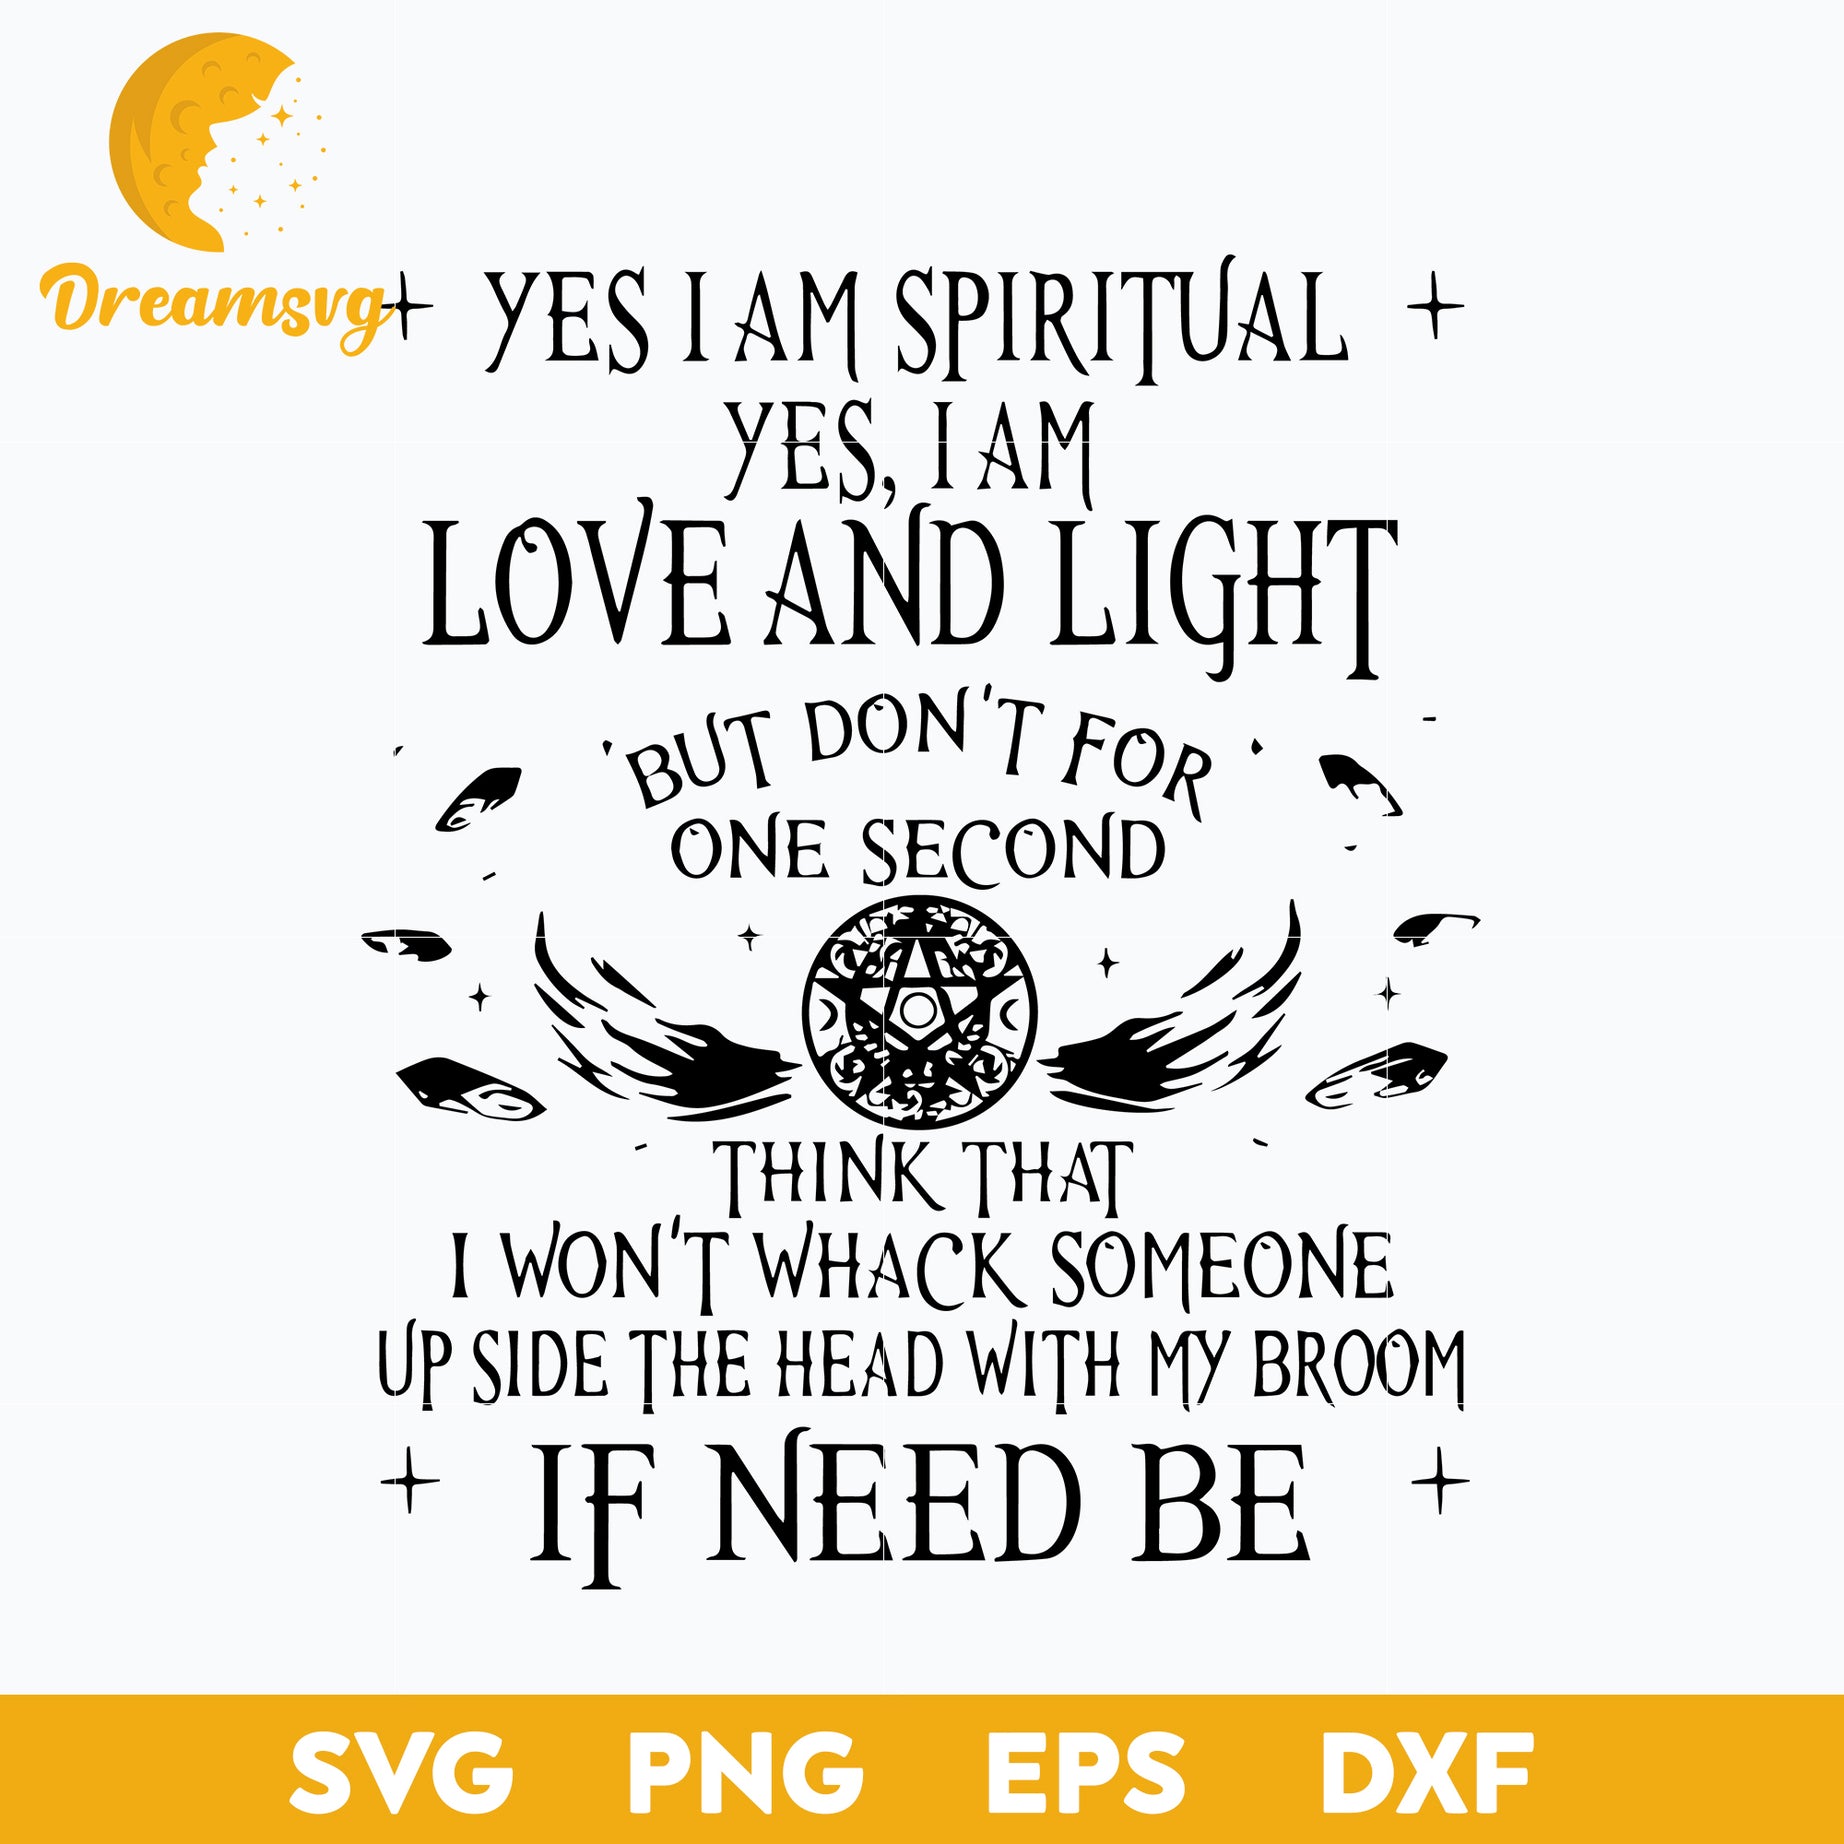 Halloween Witch Yes I Am Spiritual I Am Love And Light But Don’t For One Second svg, Halloween svg, png, dxf, eps digital file.